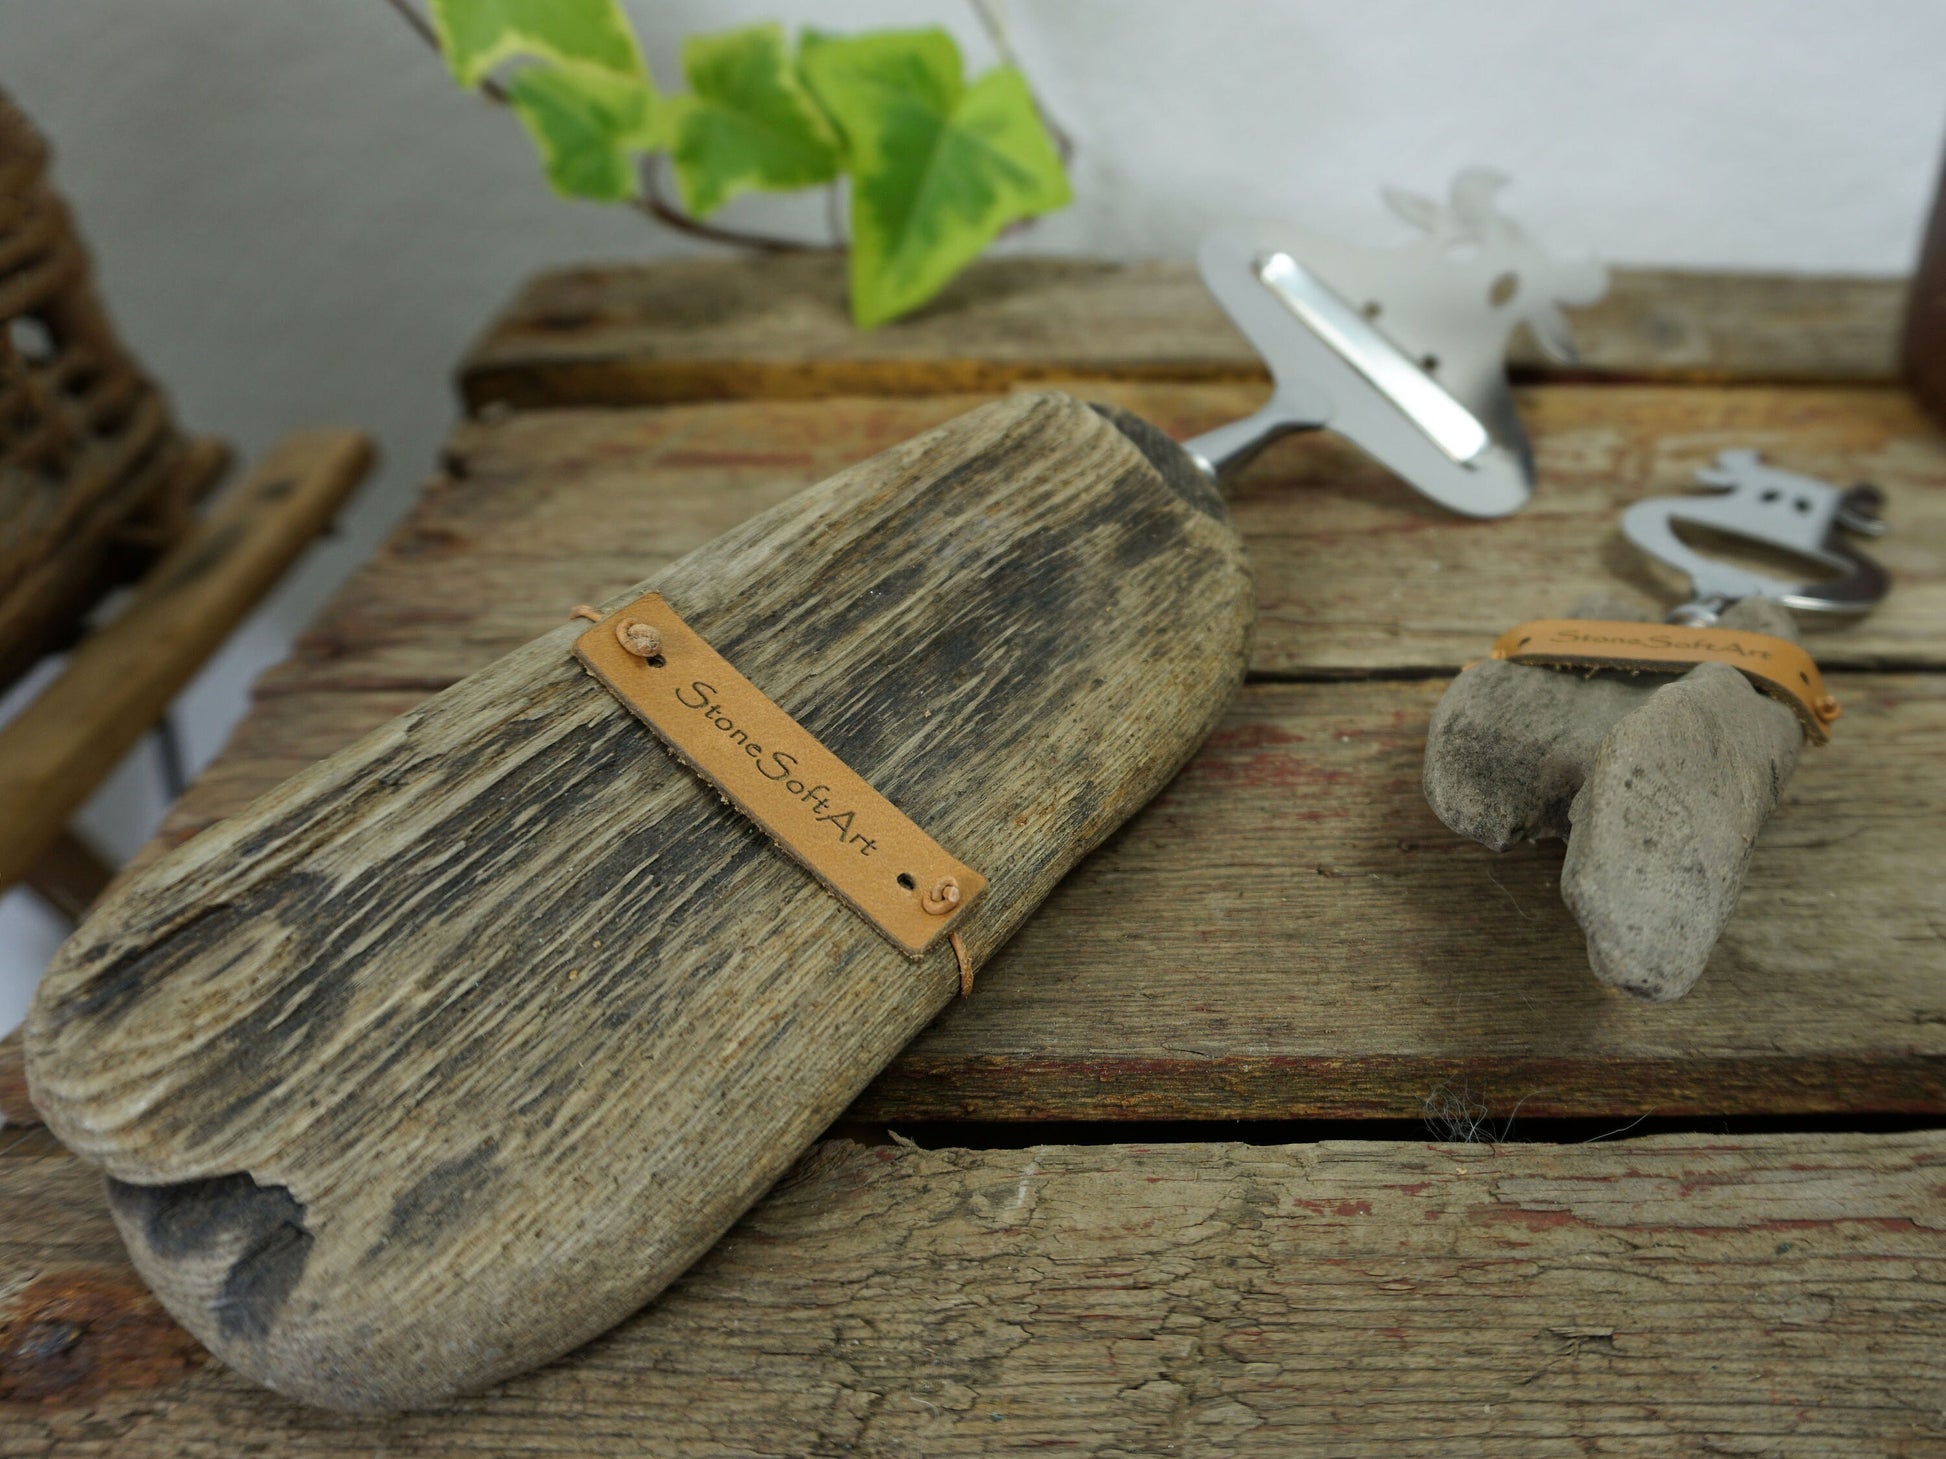 BOTTLE OPENER 'Cow Conny' with DRIFTWOOD handle, cow cutlery, handcrafted by StoneSoftArt